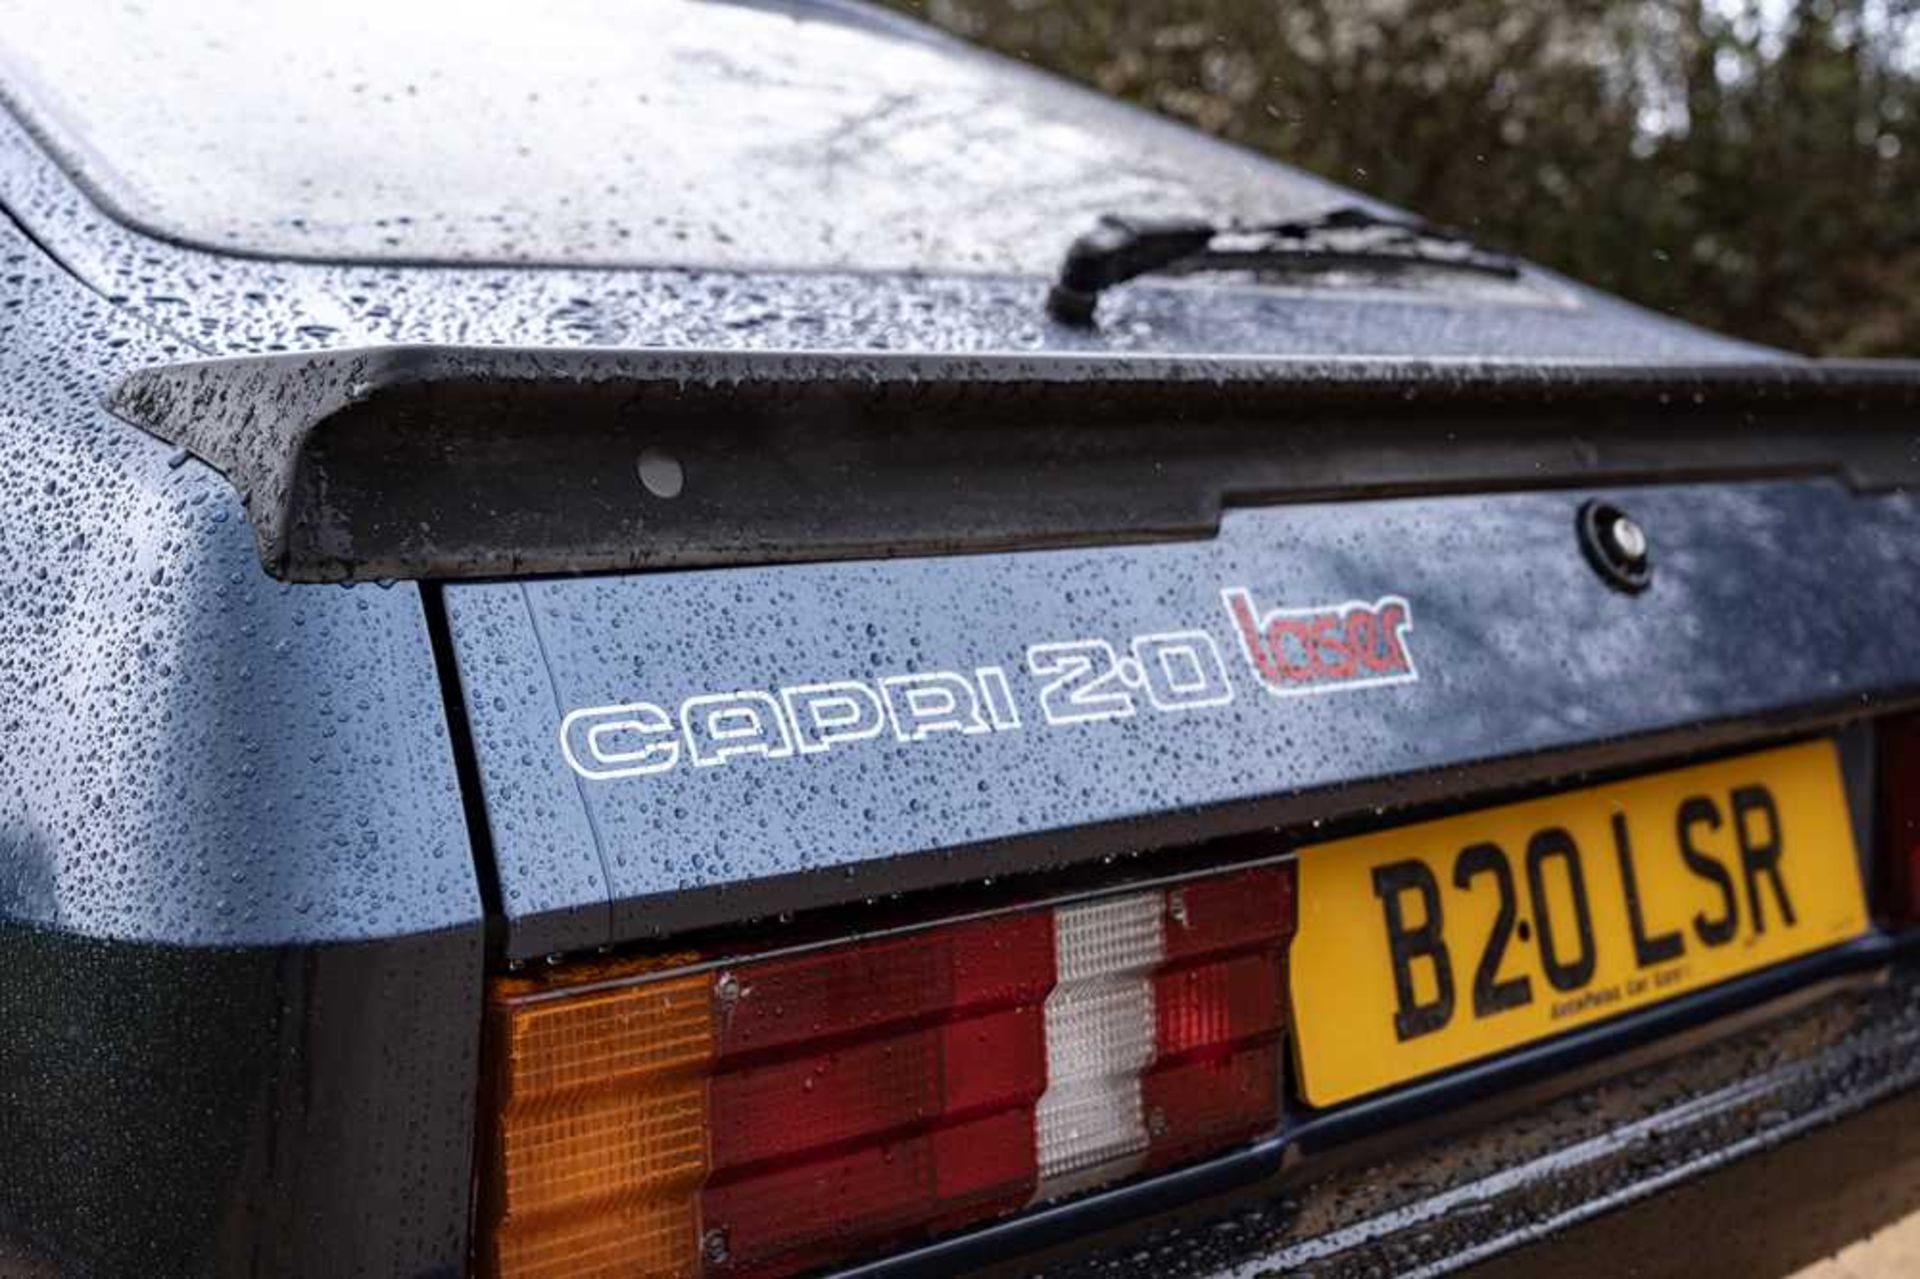 1985 Ford Capri Laser 2.0 Litre Warranted 55,300 miles from new - Image 24 of 67